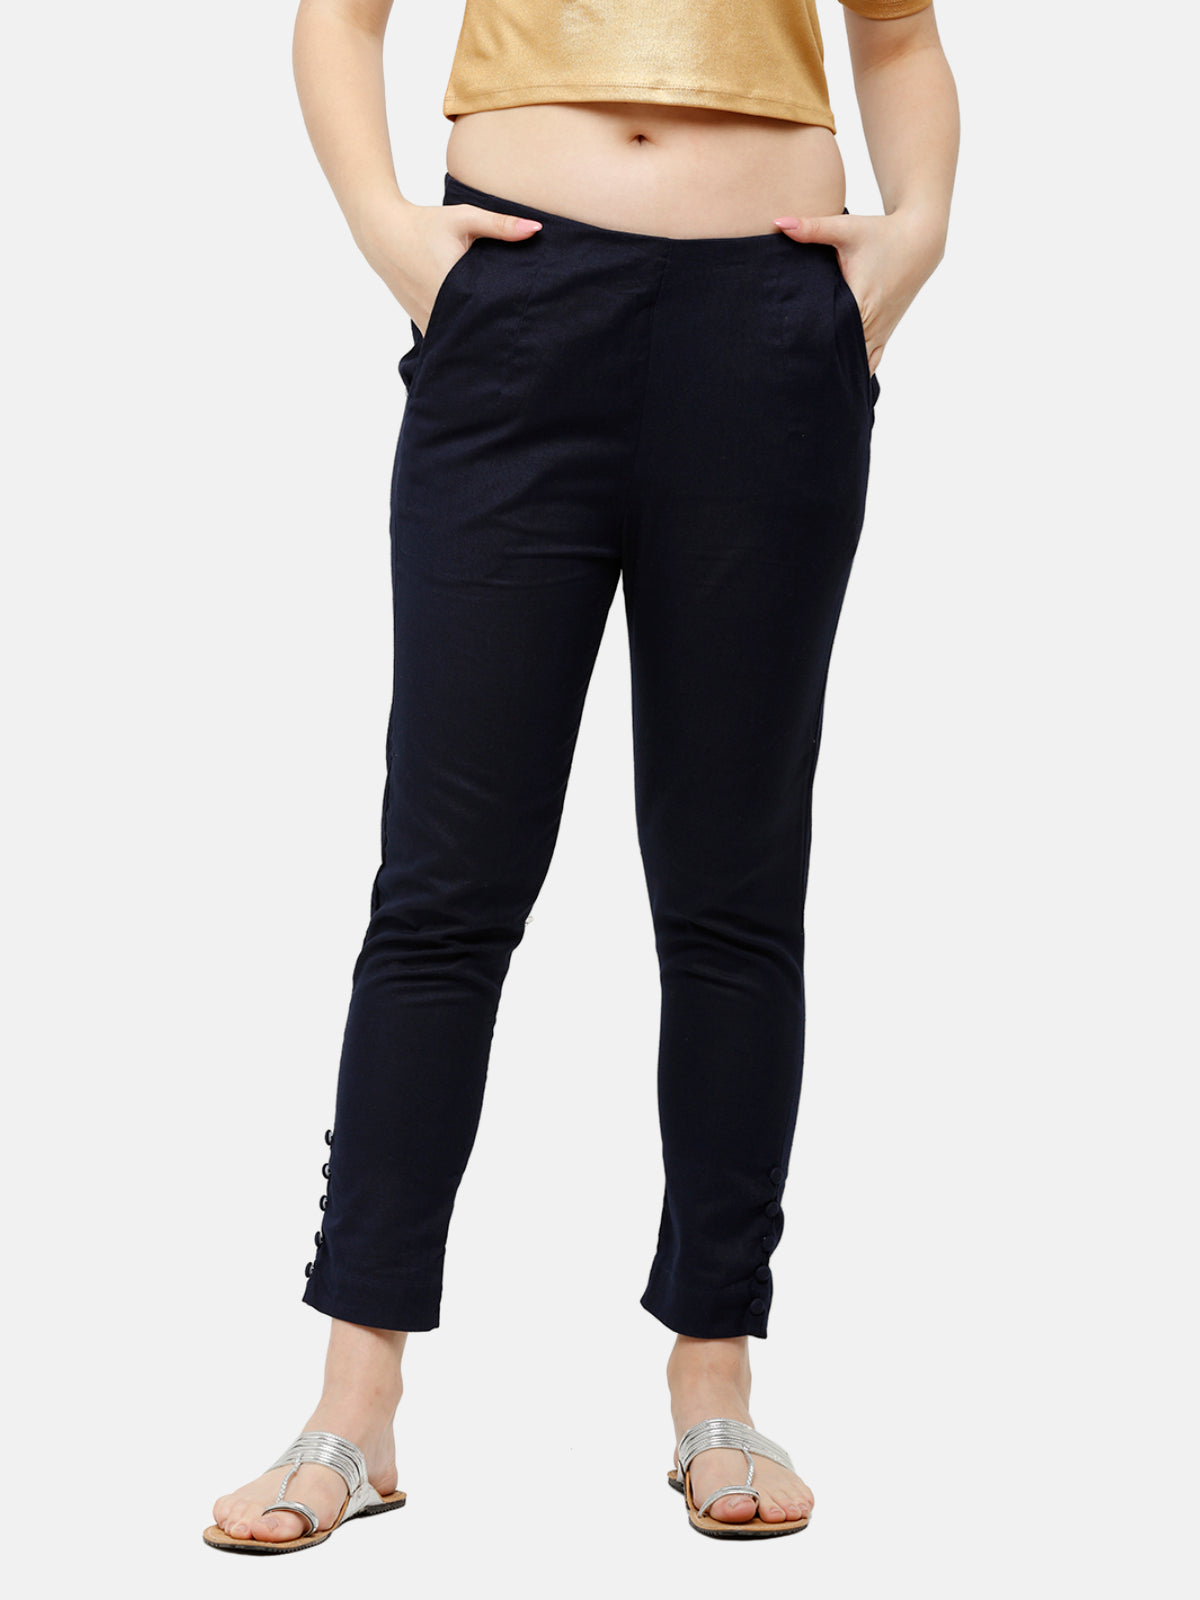 Buy Grey Rayon Solid Cigarette Pants Online in India